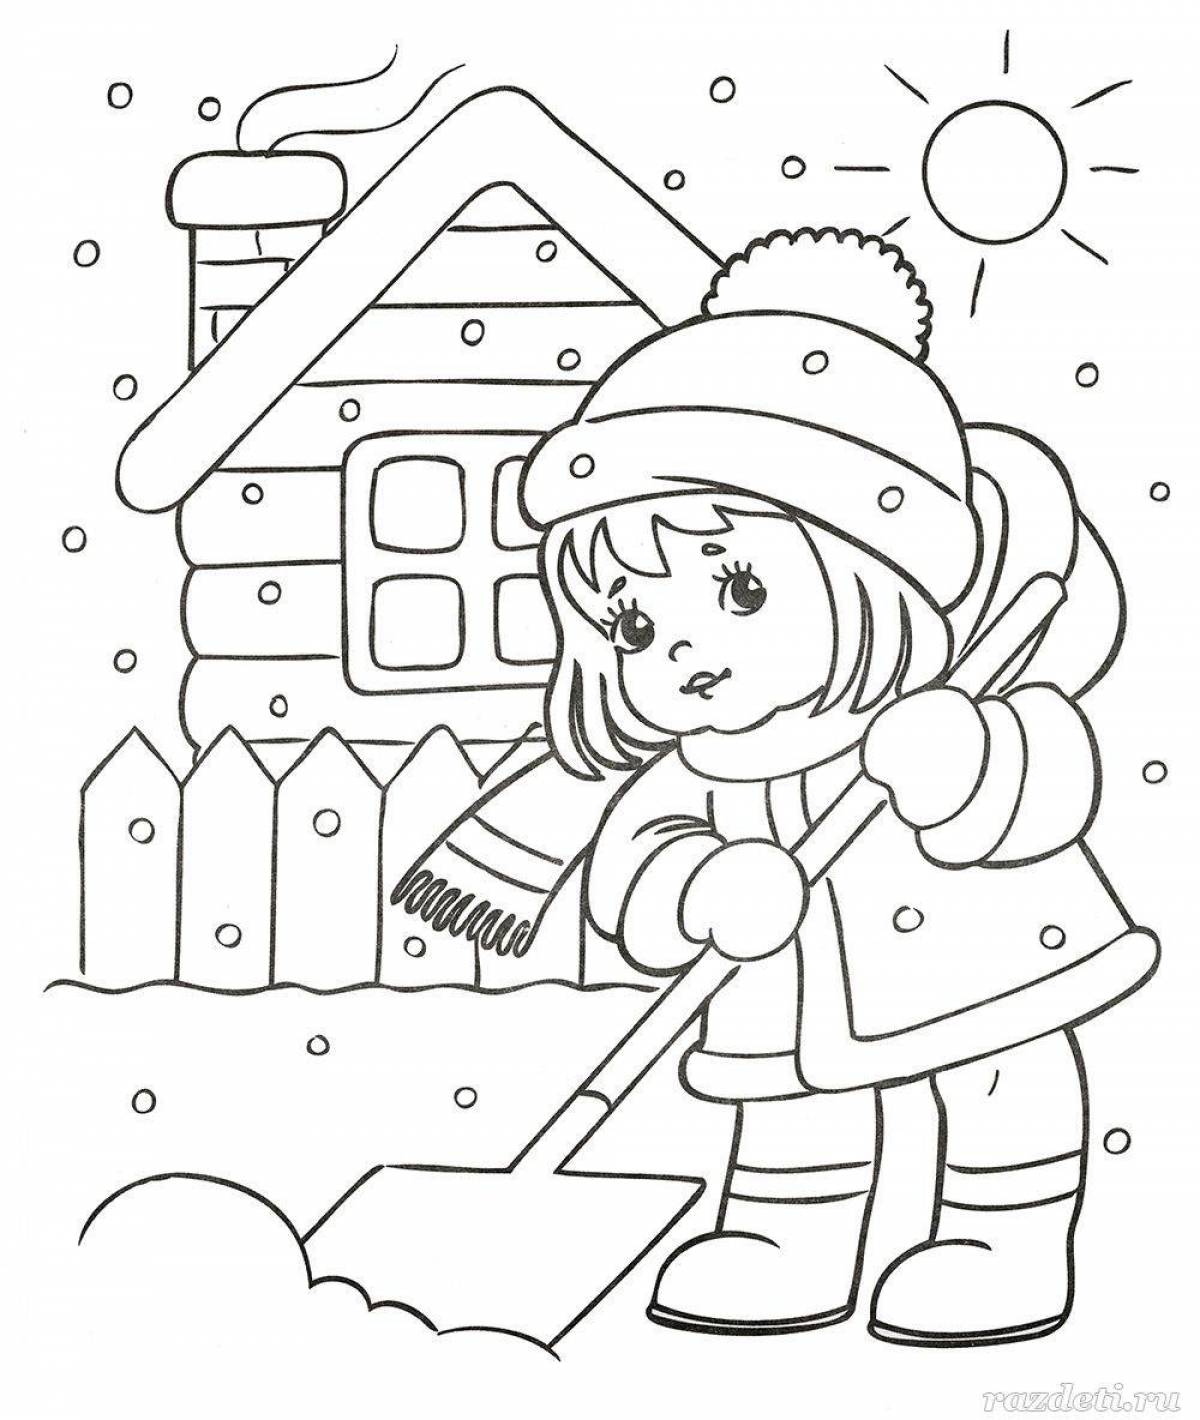 Joyful winter coloring book for children 4-5 years old